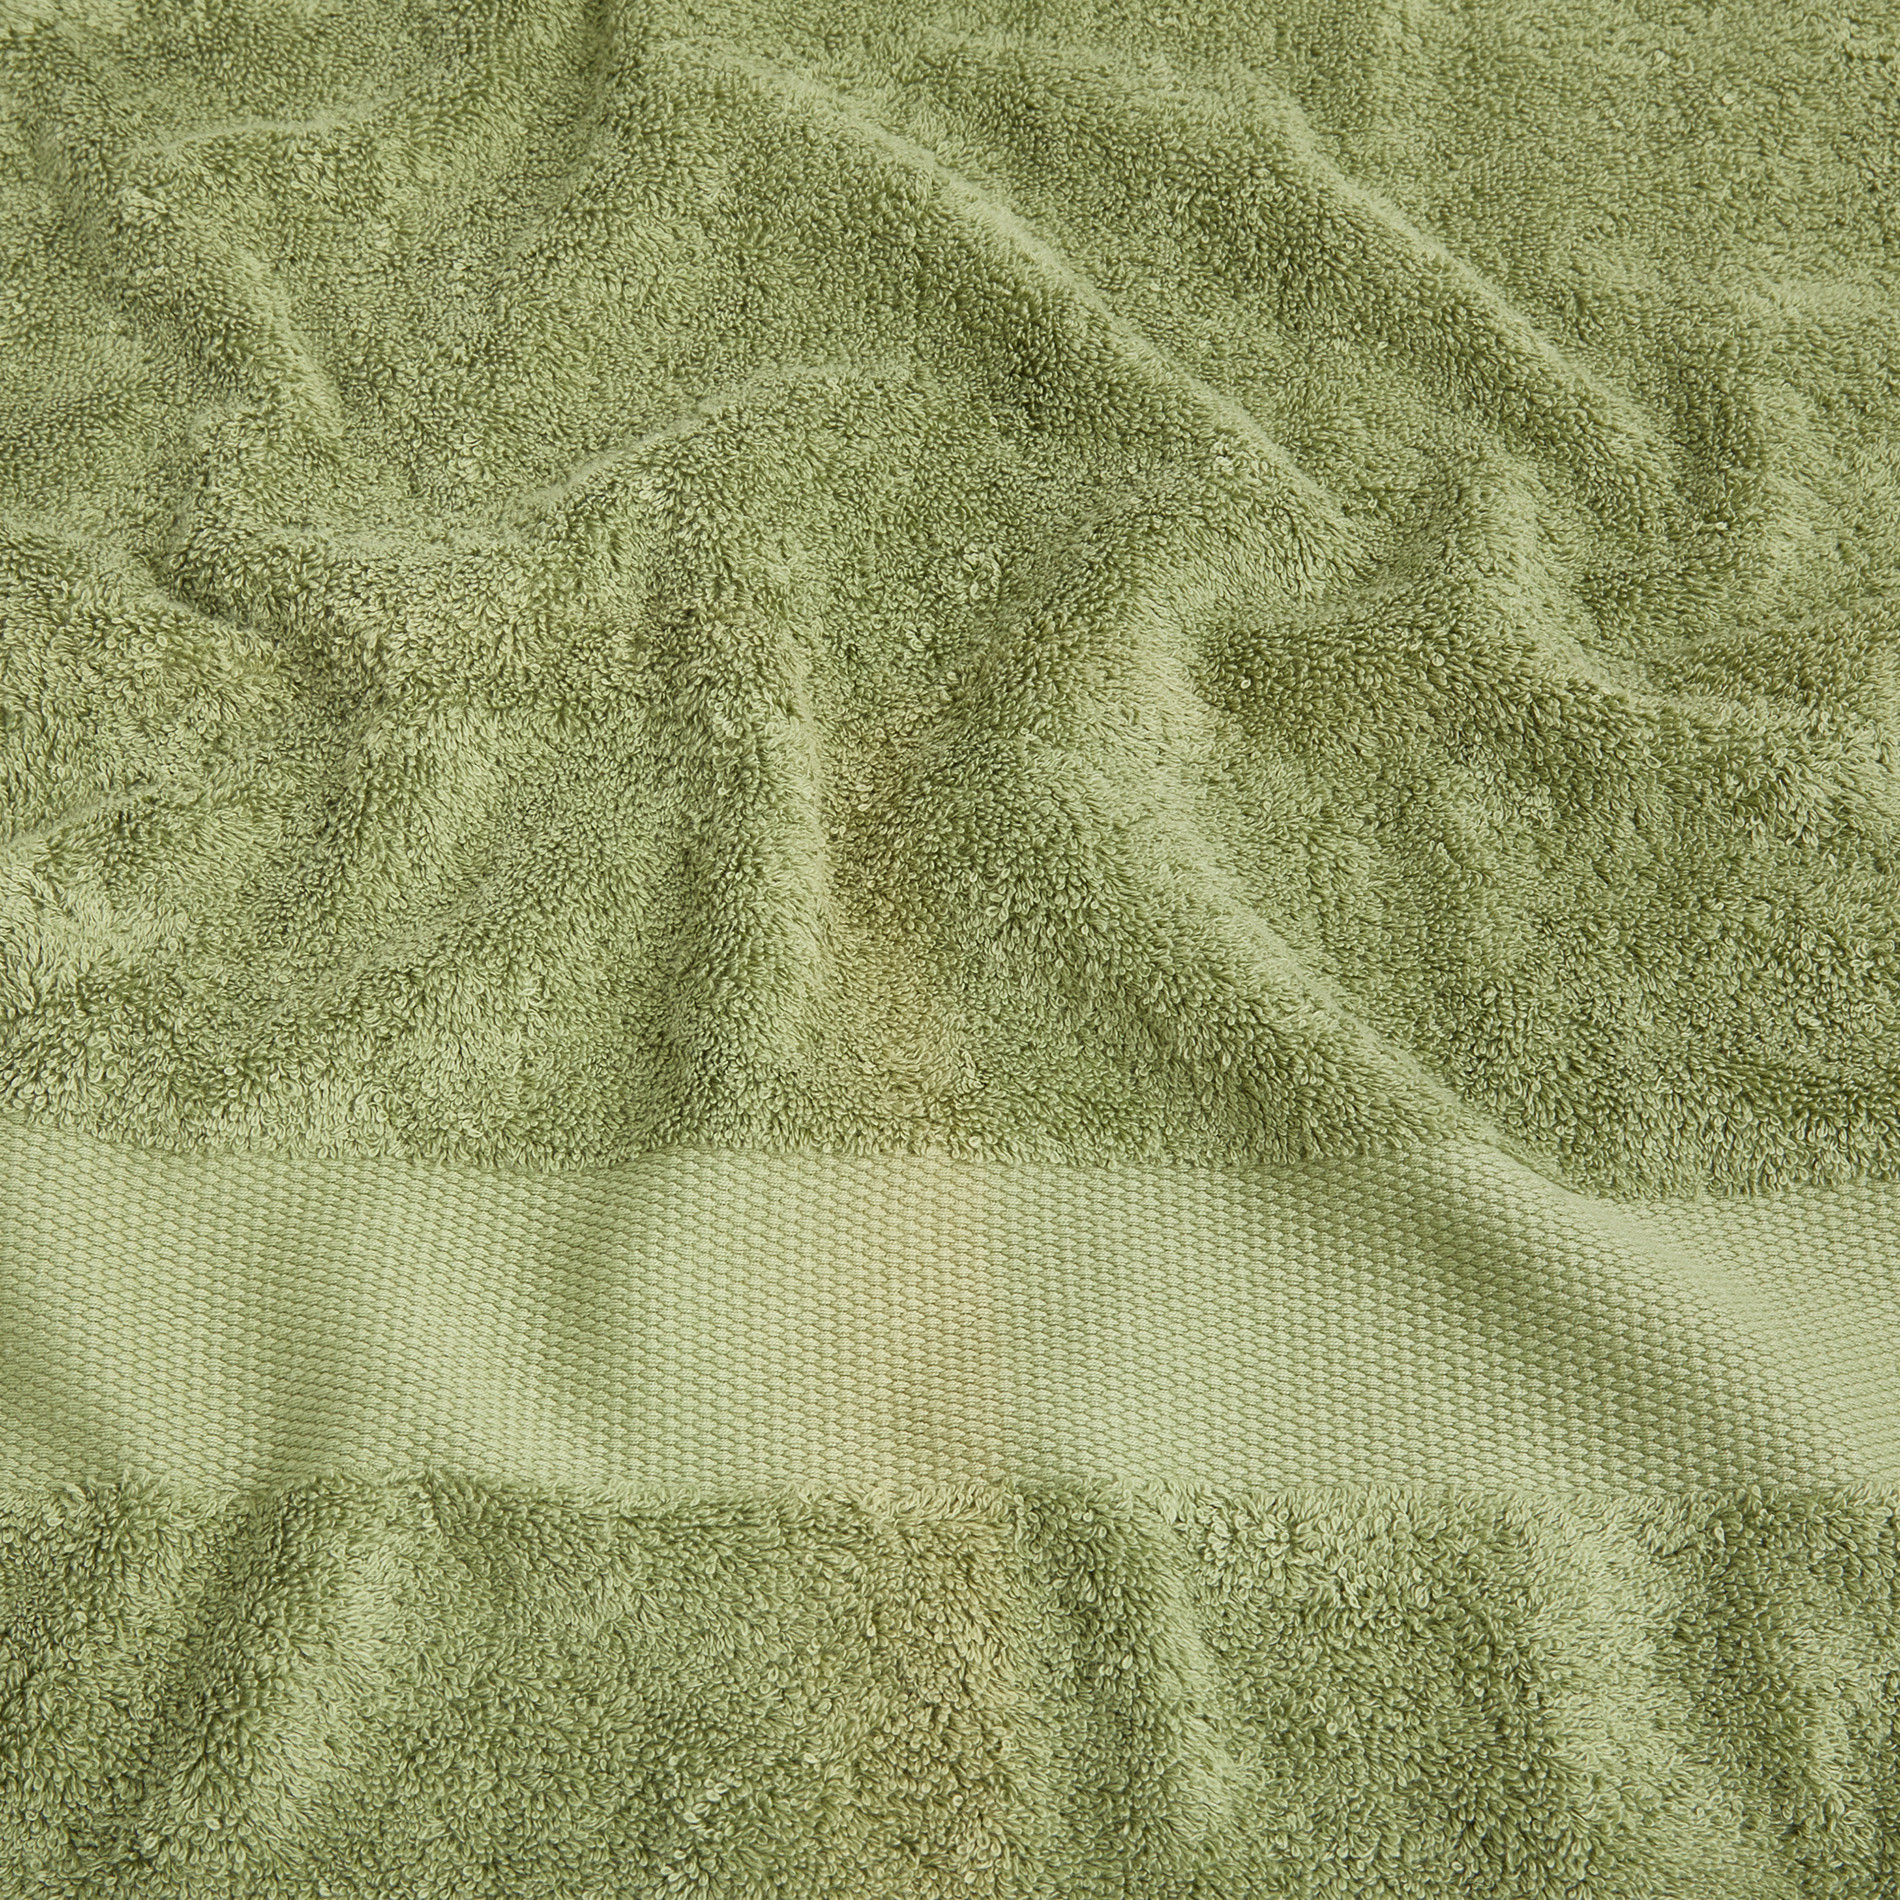 Zefiro pure cotton terry towel, Sage Green, large image number 3